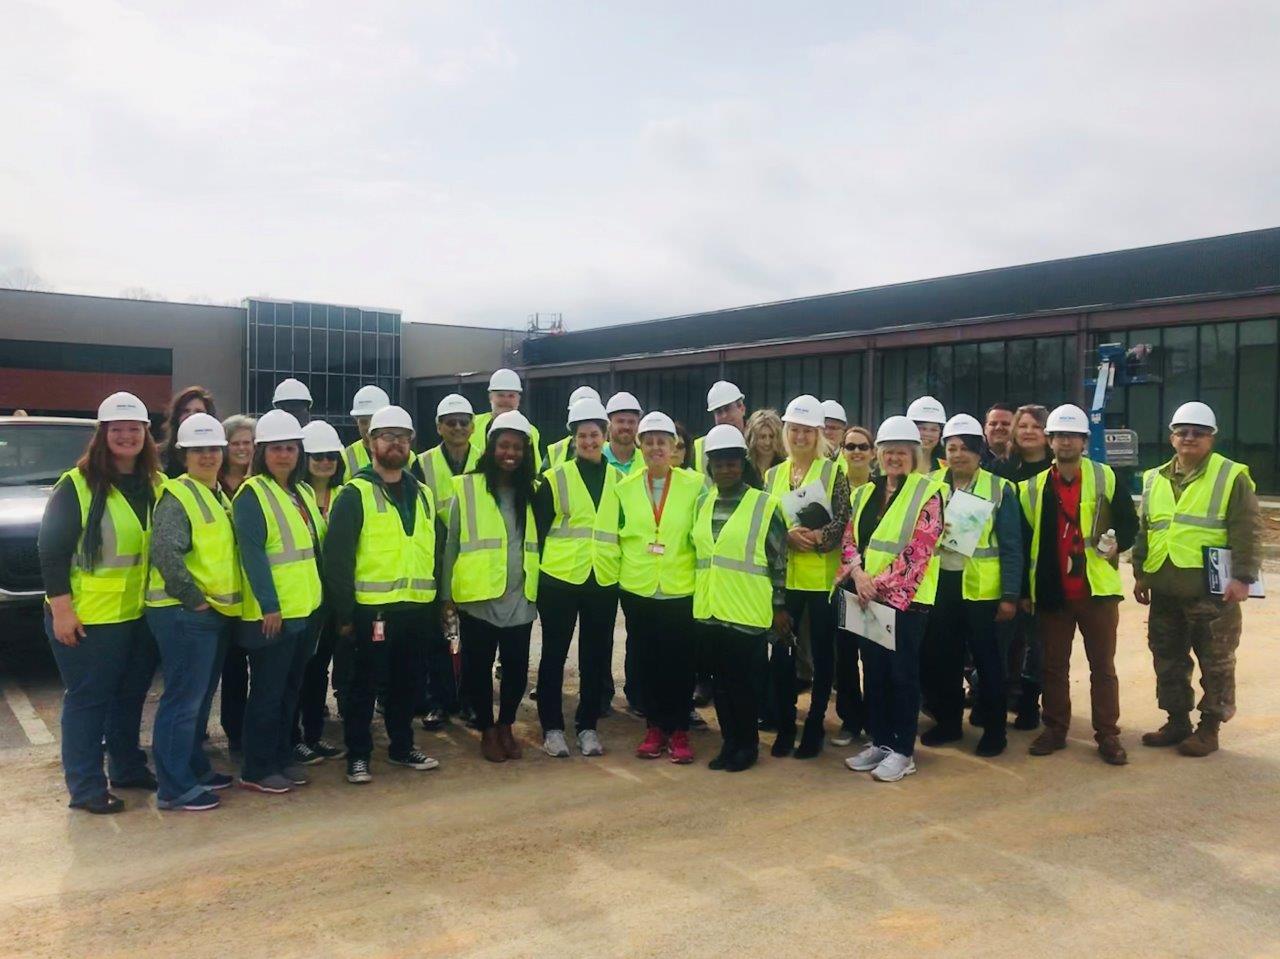 Career, Technical, and Agricultural Education (CTAE) teachers from Dalton Public Schools recently toured the new expansion at Georgia Northwestern Technical College’s Whitfield Murray Campus.”